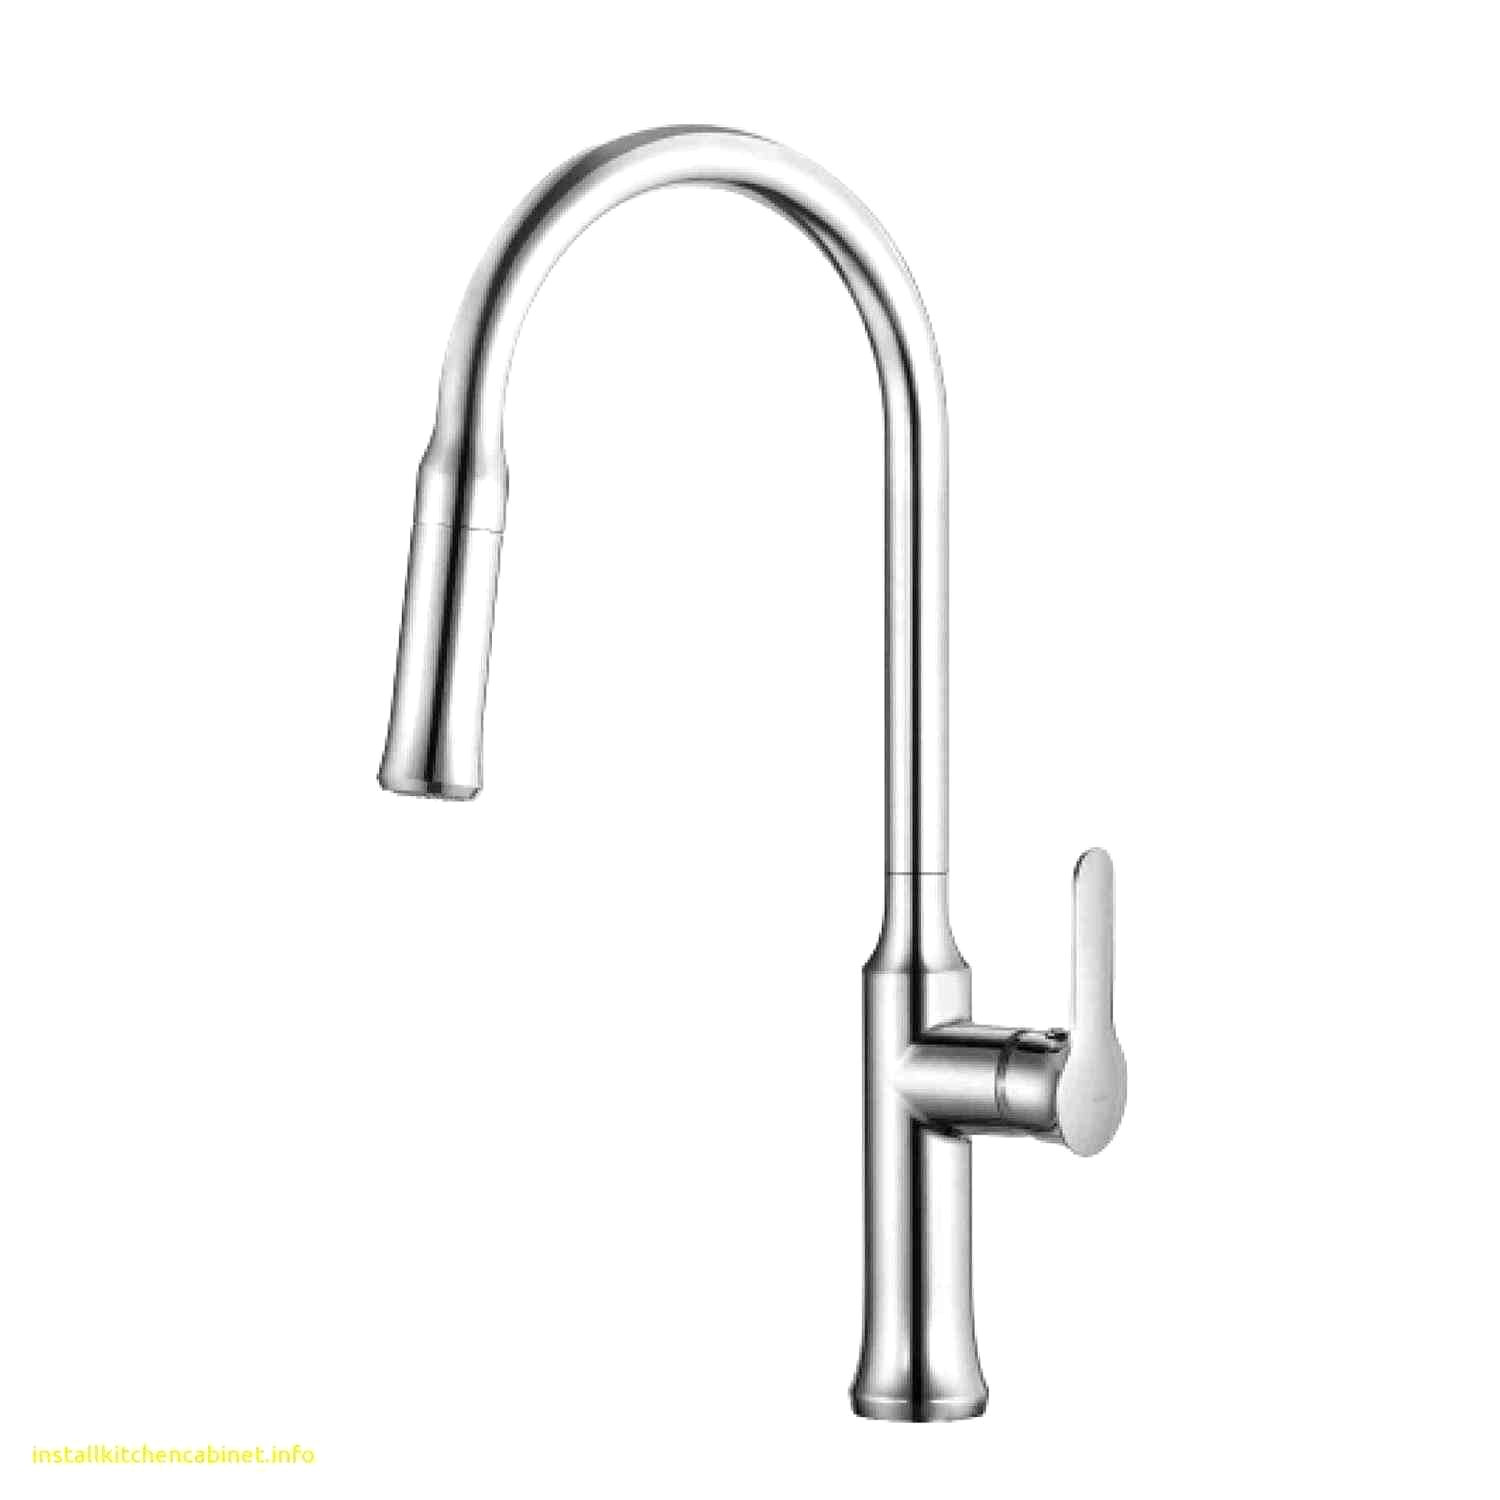 waterridge kitchen faucet parts beautiful 50 luxury kohler malleco pull down kitchen sink faucet with soap